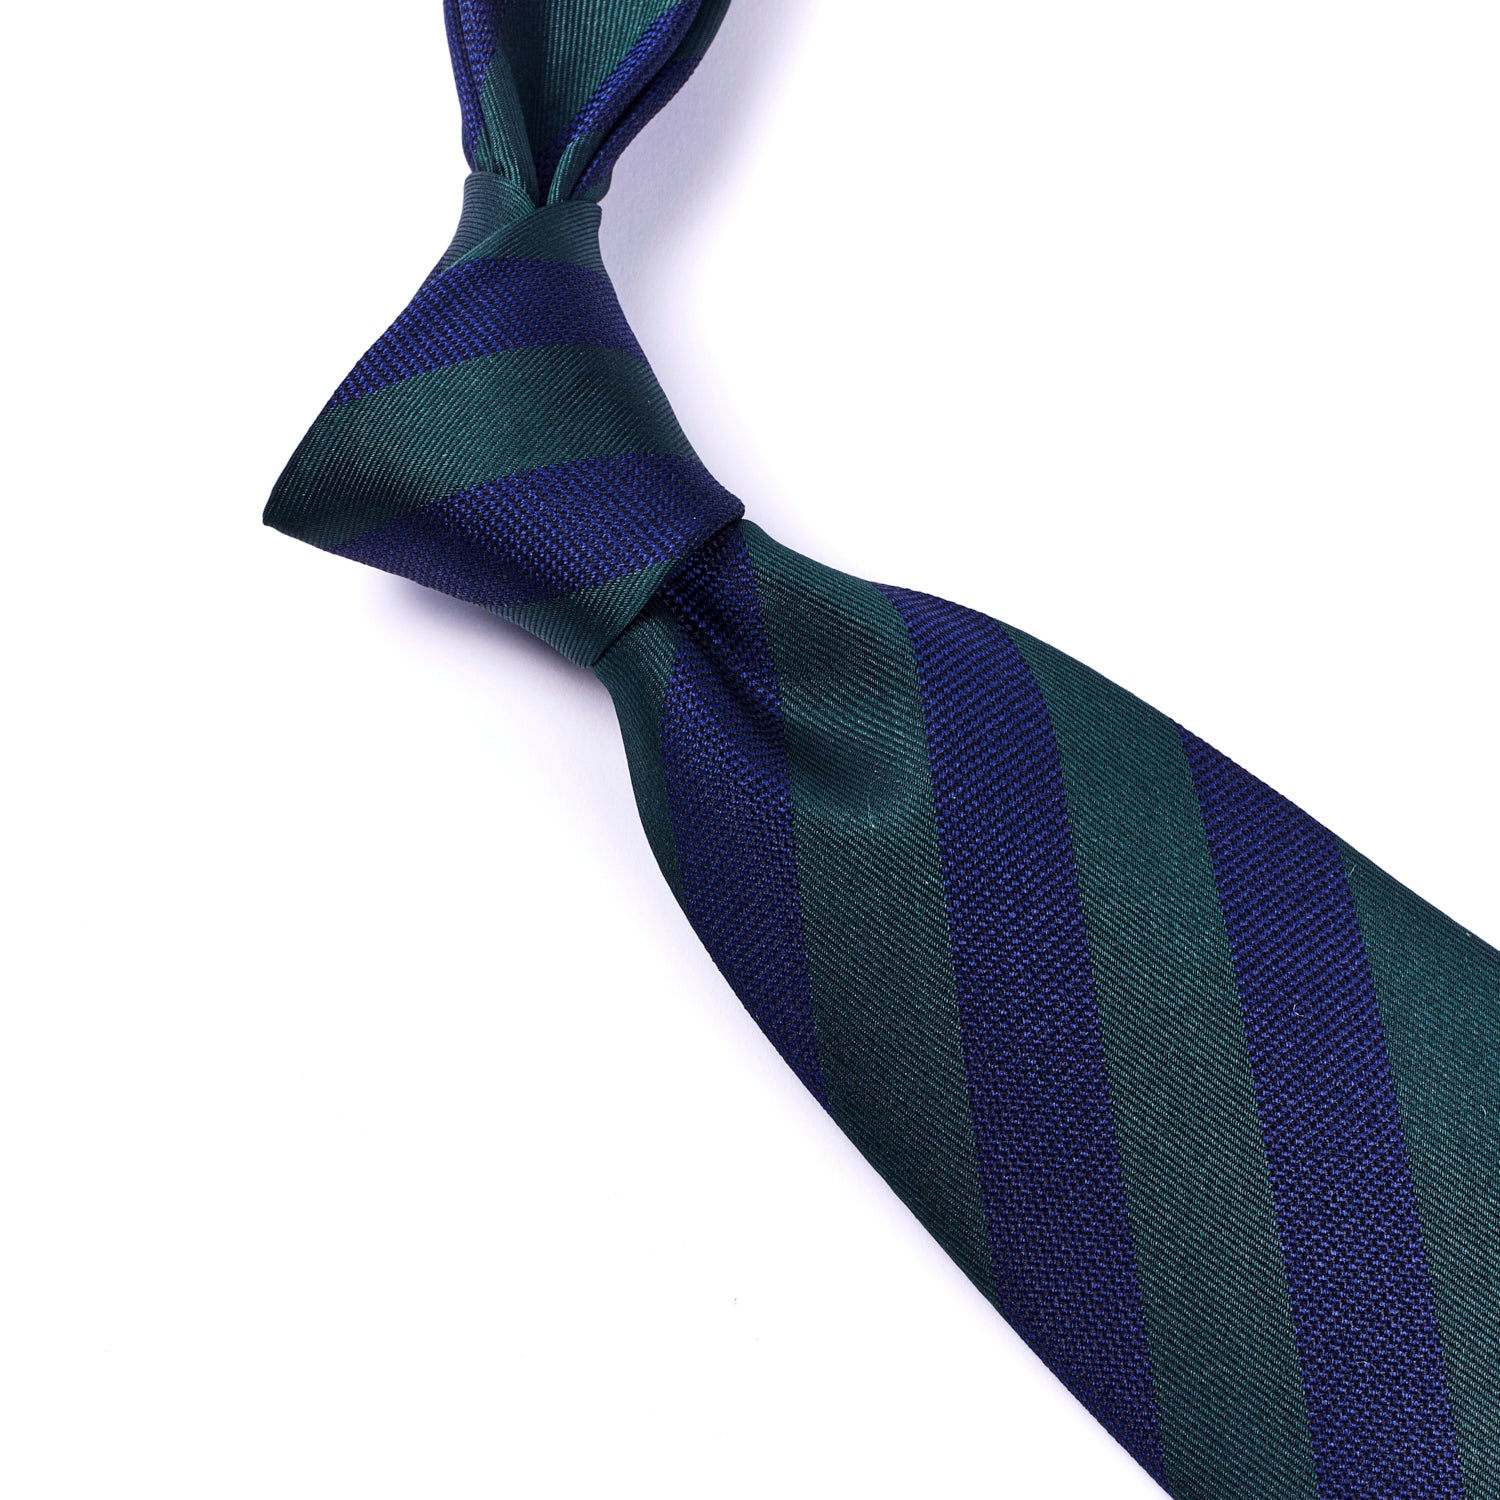 A high-quality Sovereign Grade Woven Navy and Green Rep Tie, 150 cm from KirbyAllison.com with green and blue stripes on a white background.